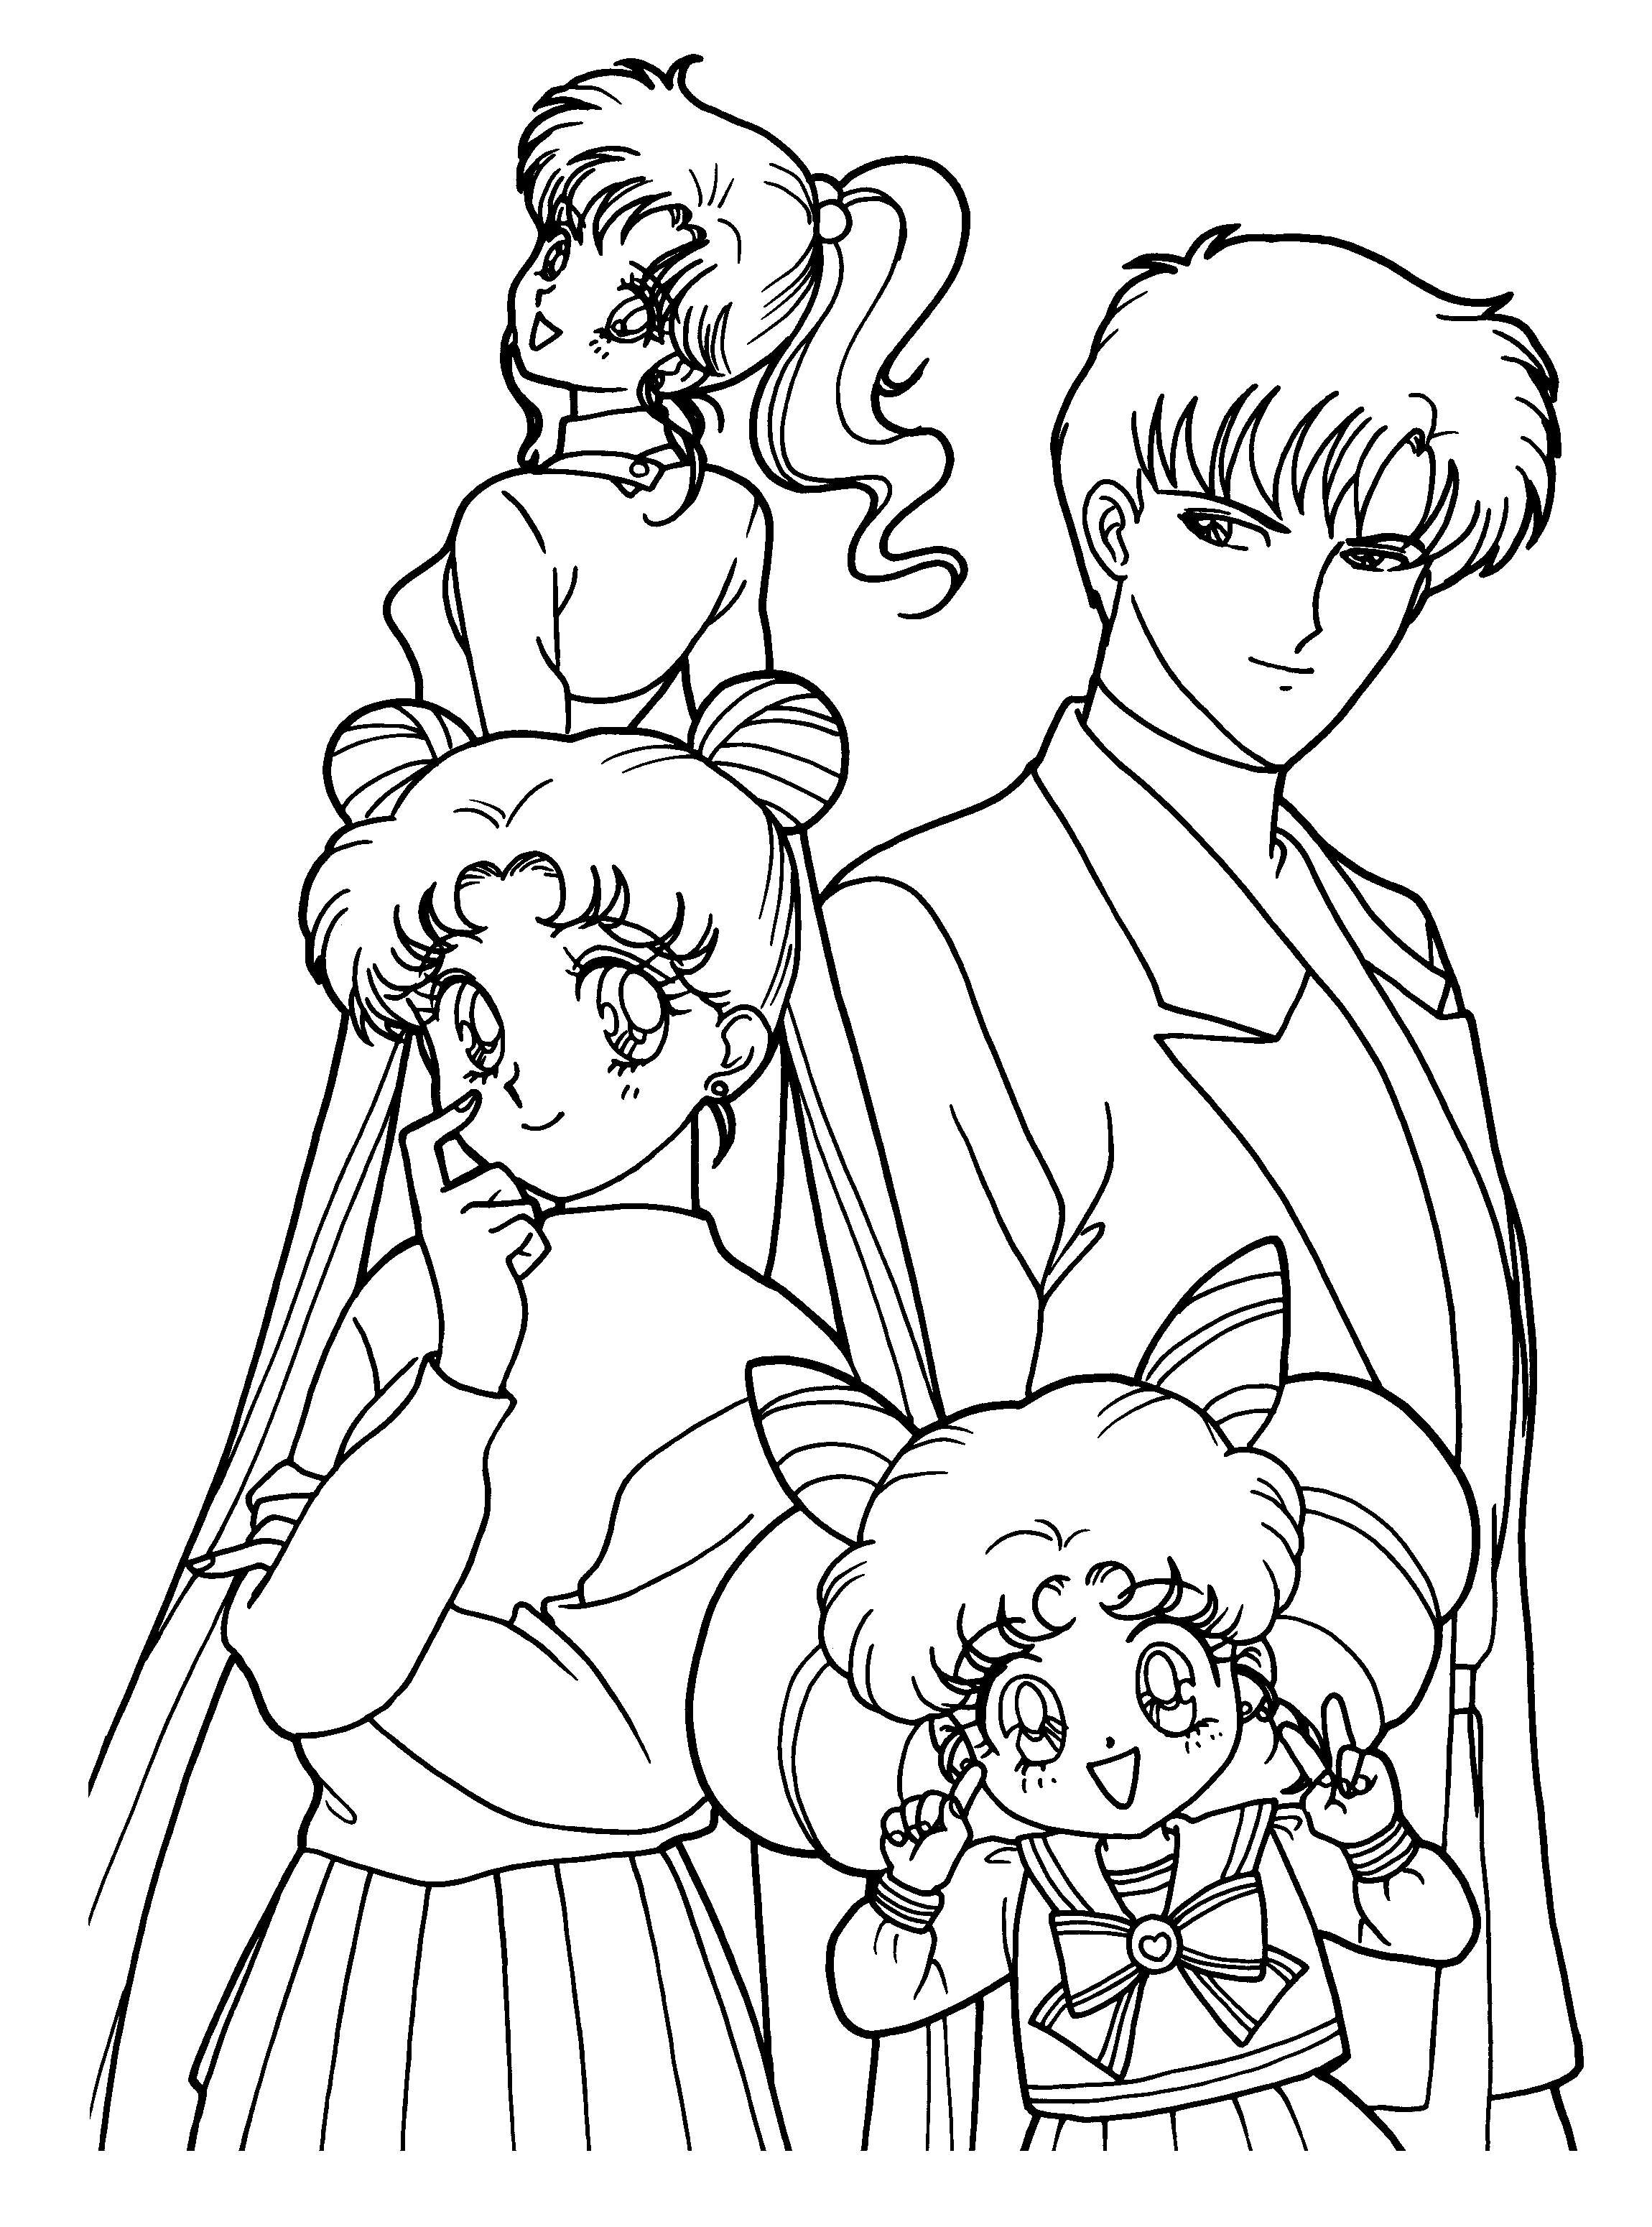 animated-coloring-pages-sailor-moon-image-0098